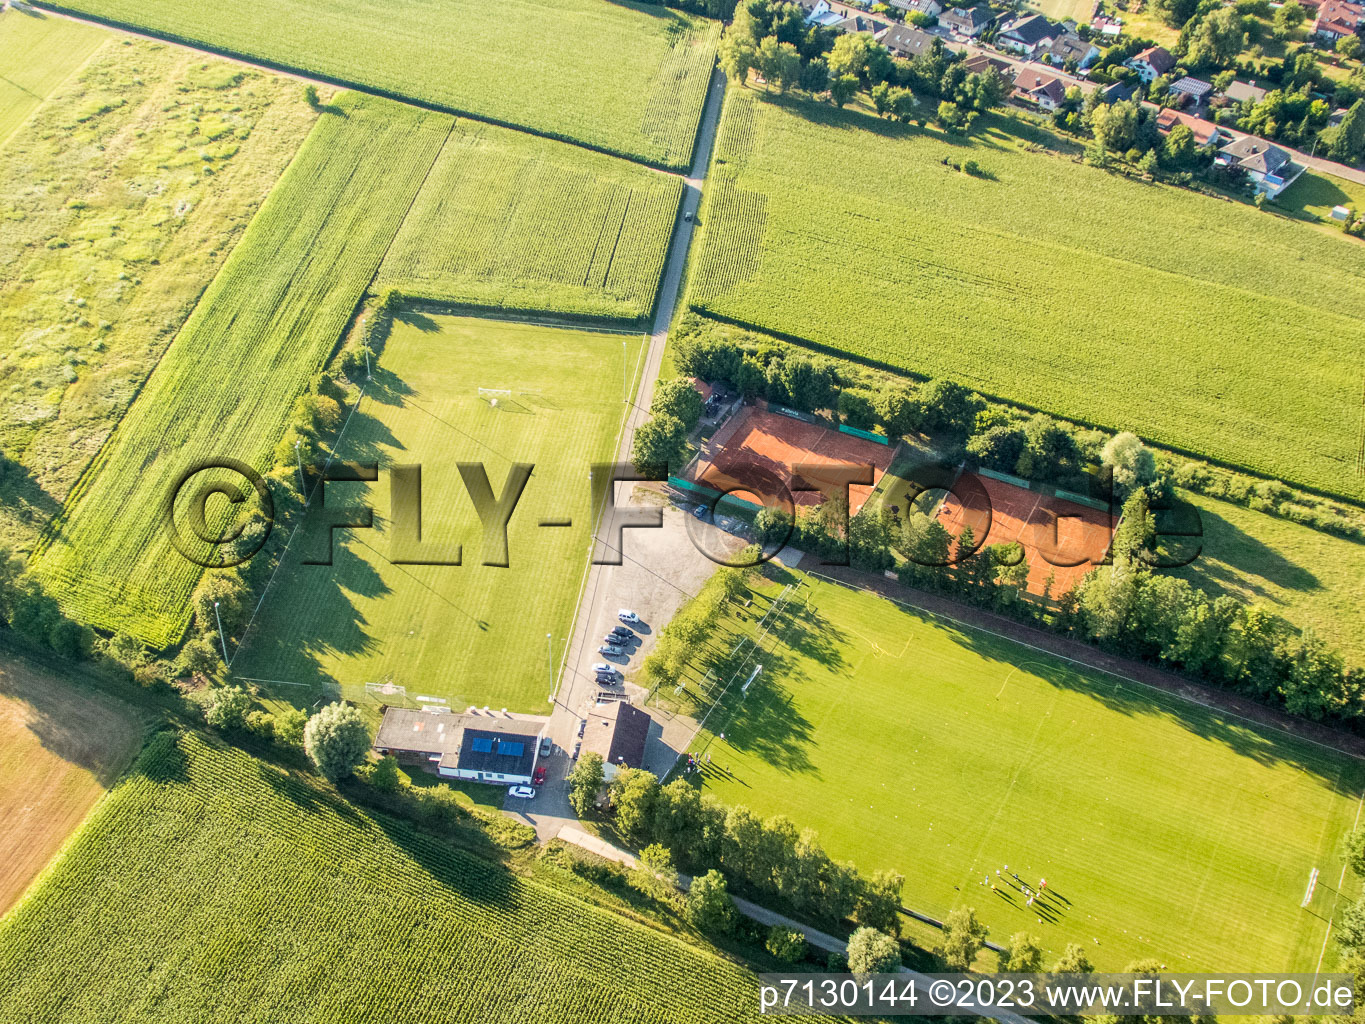 Minfeld in the state Rhineland-Palatinate, Germany from the drone perspective